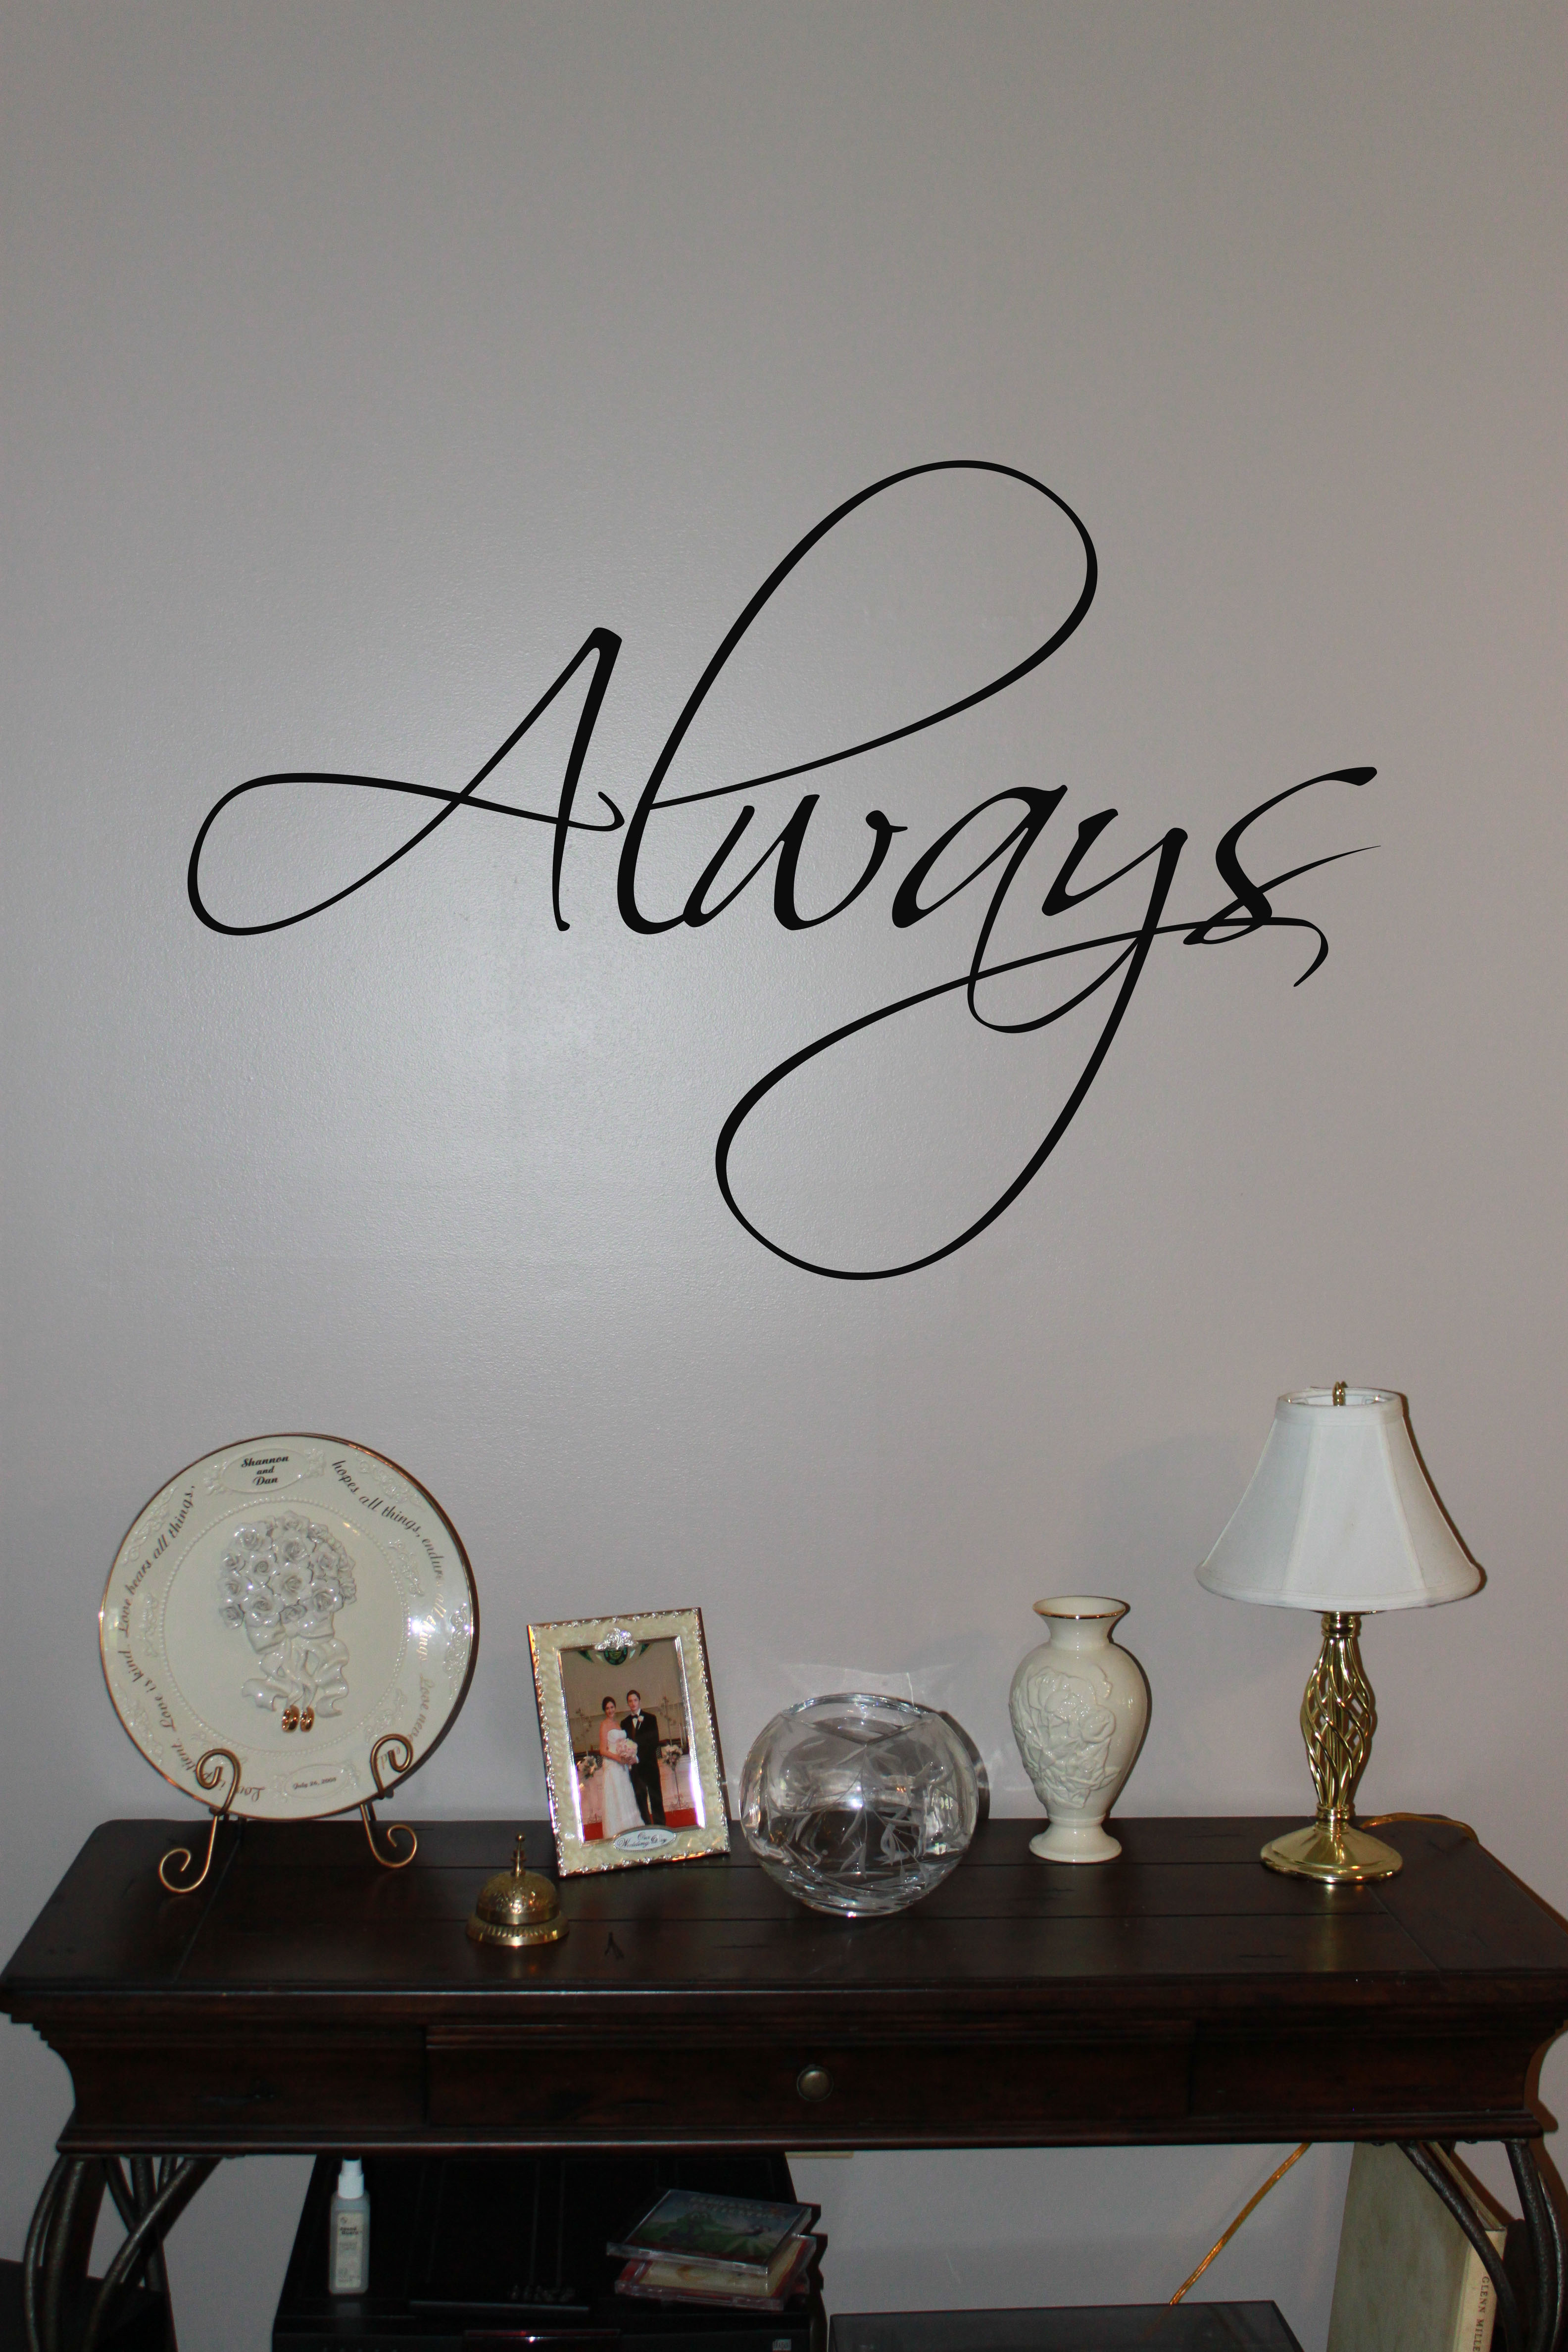 Always Wall Decal